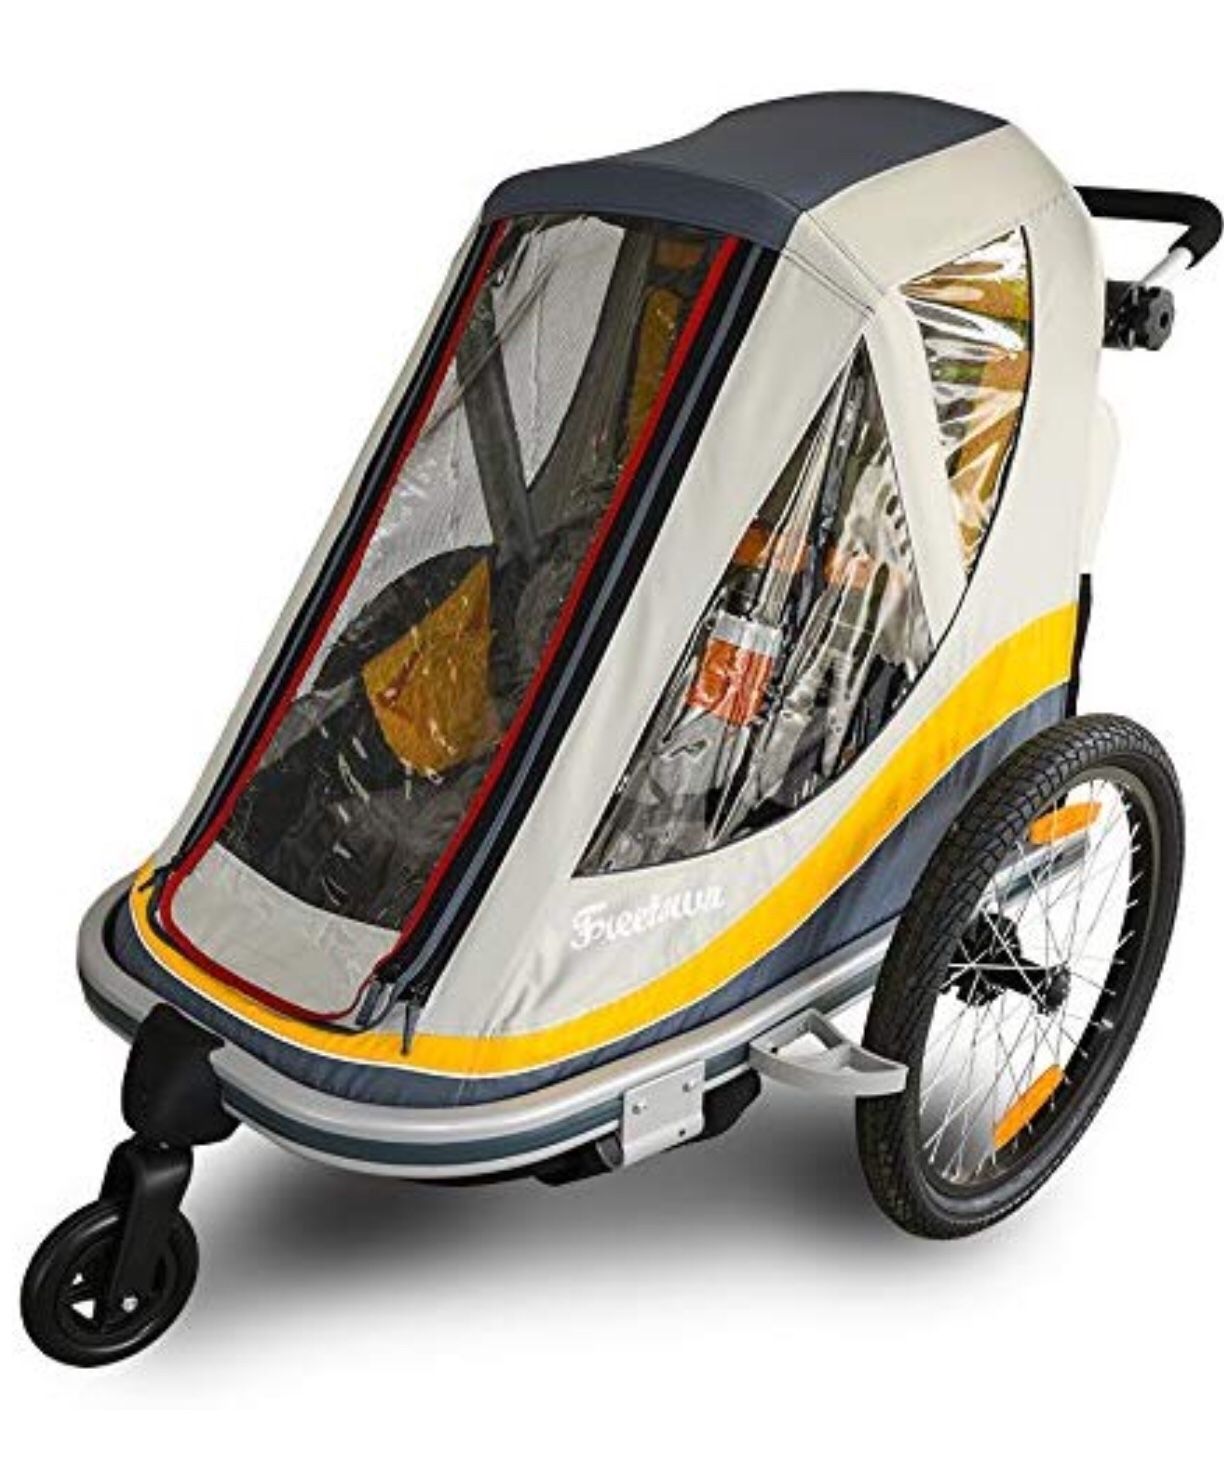 Freetown Sweetroll two child bike trailer with stroller conversion kit